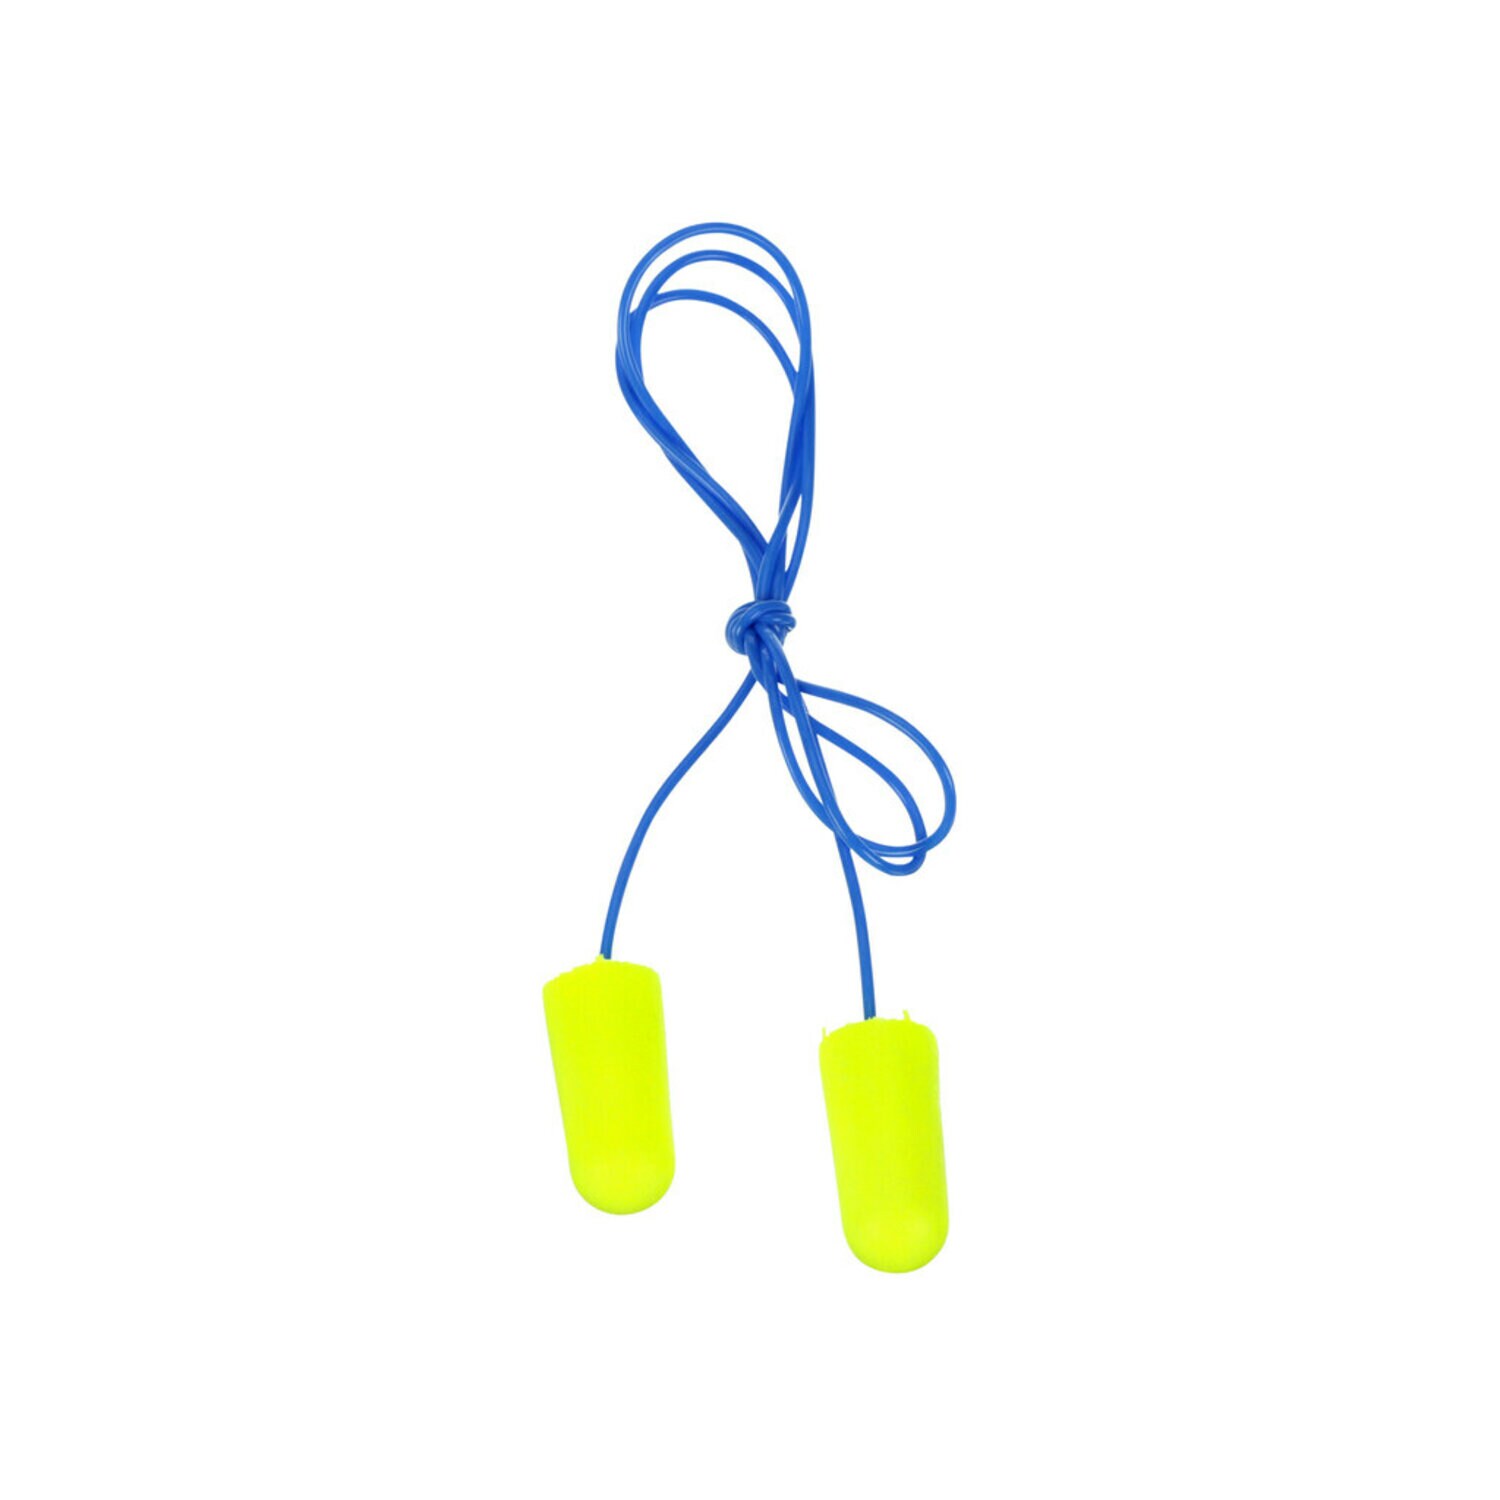 7000002306 - 3M E-A-Rsoft Yellow Neons Earplugs 311-1250, Corded, Poly Bag,
Regular Size, 2000 Pair/Case